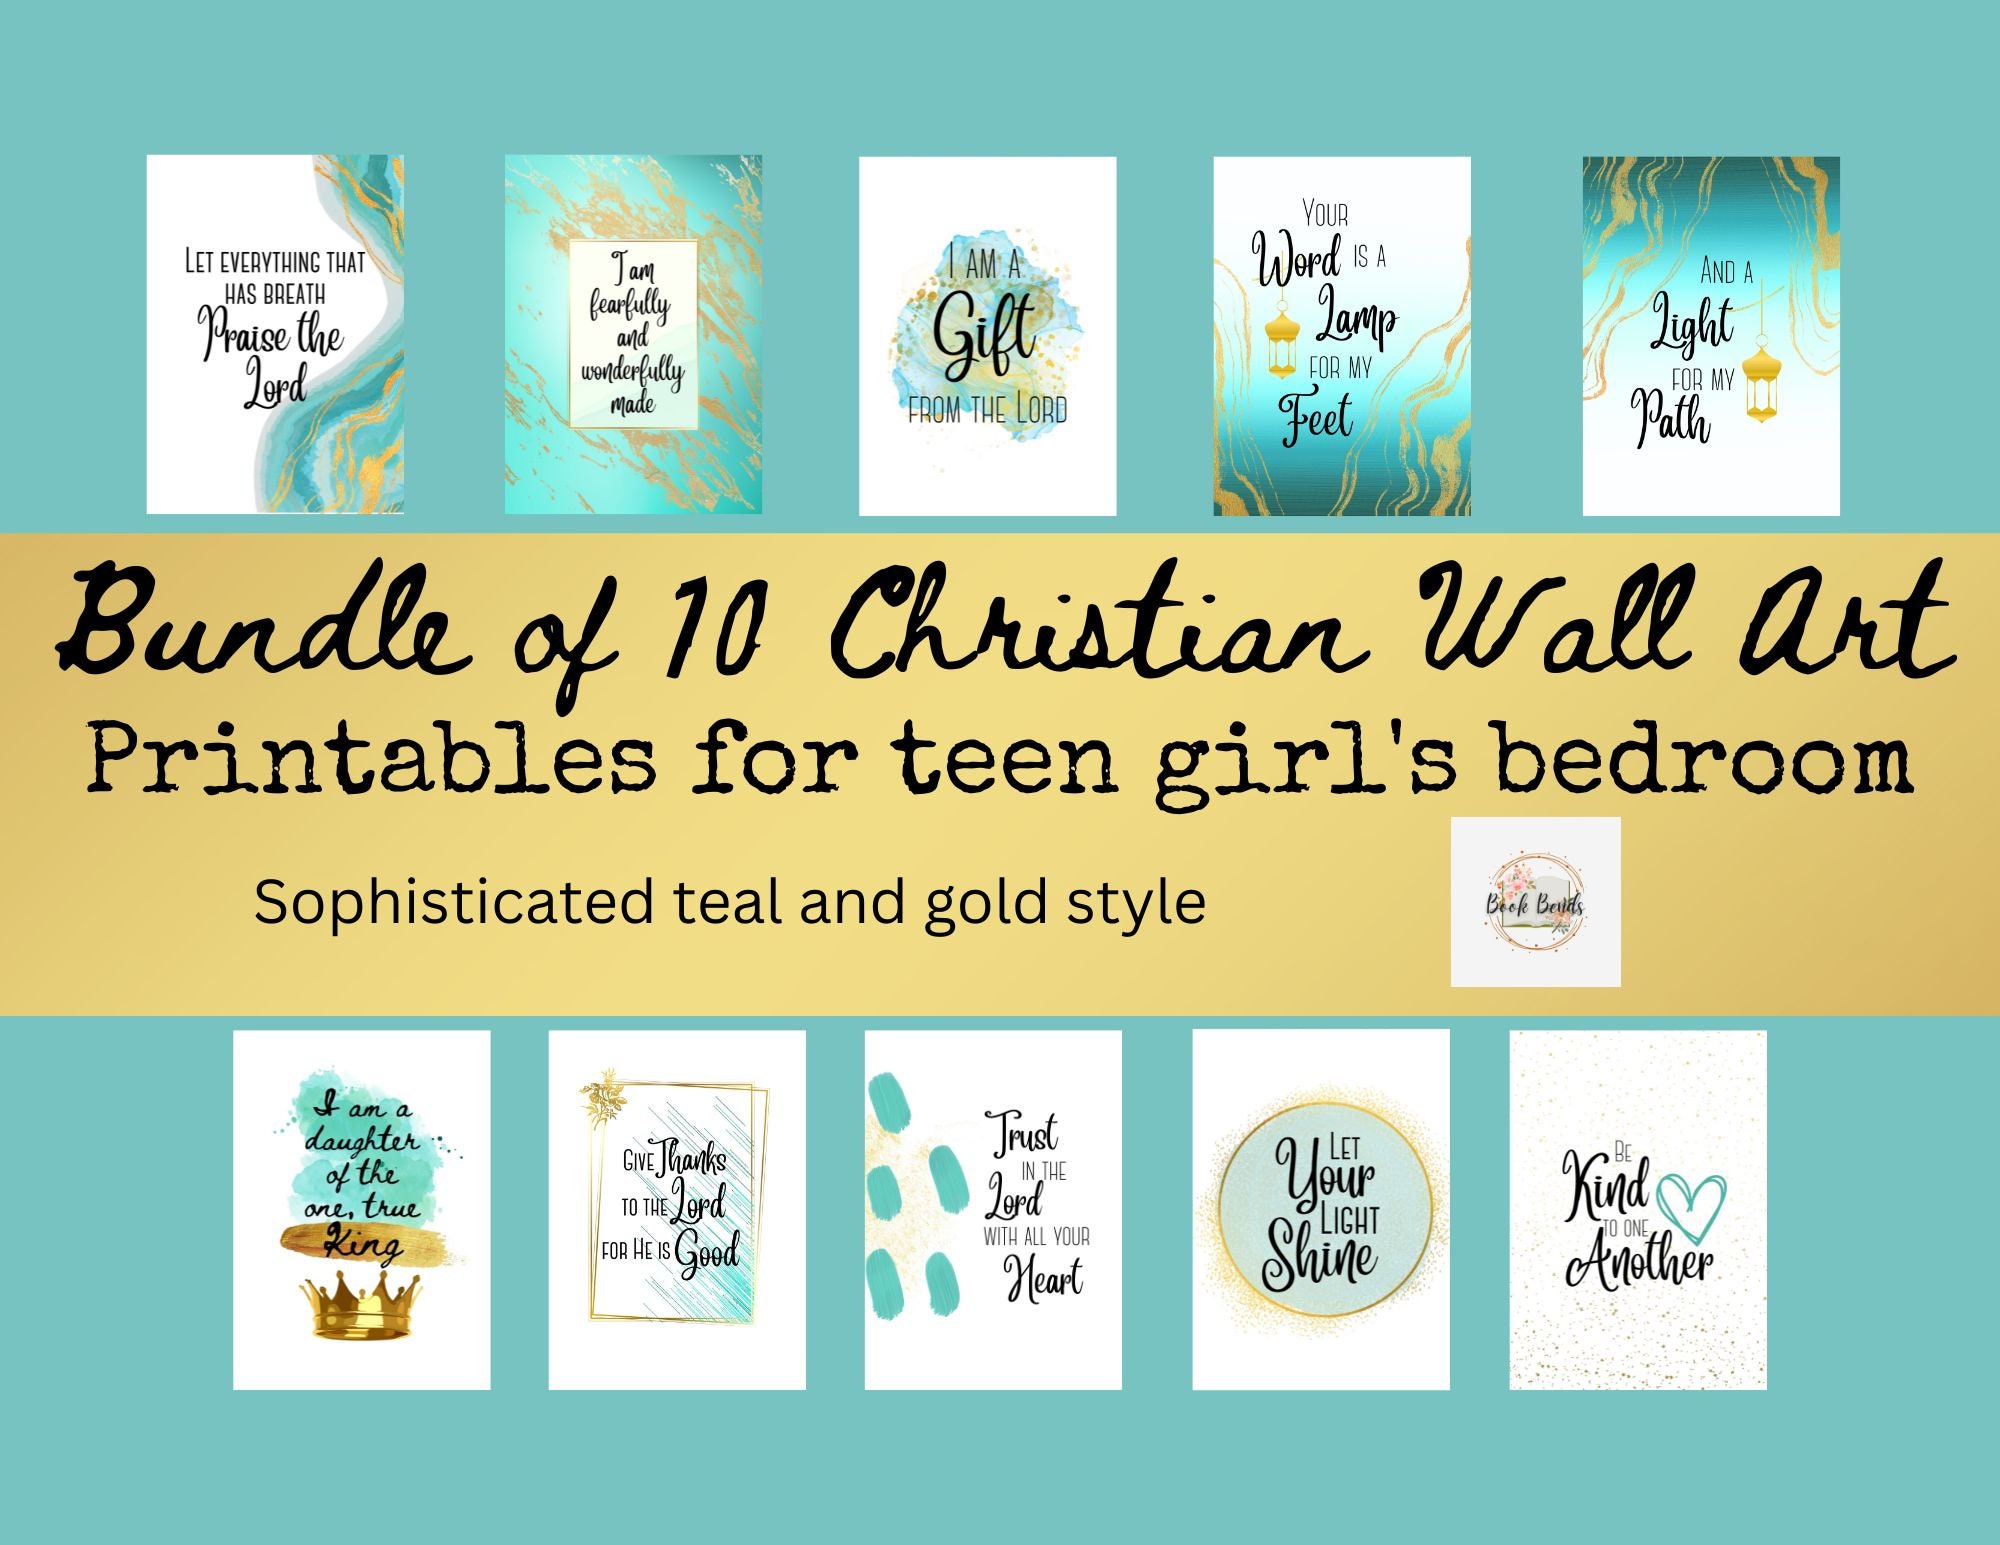 11 Christian gifts for young girls (Educational Ideas) – Christian Walls